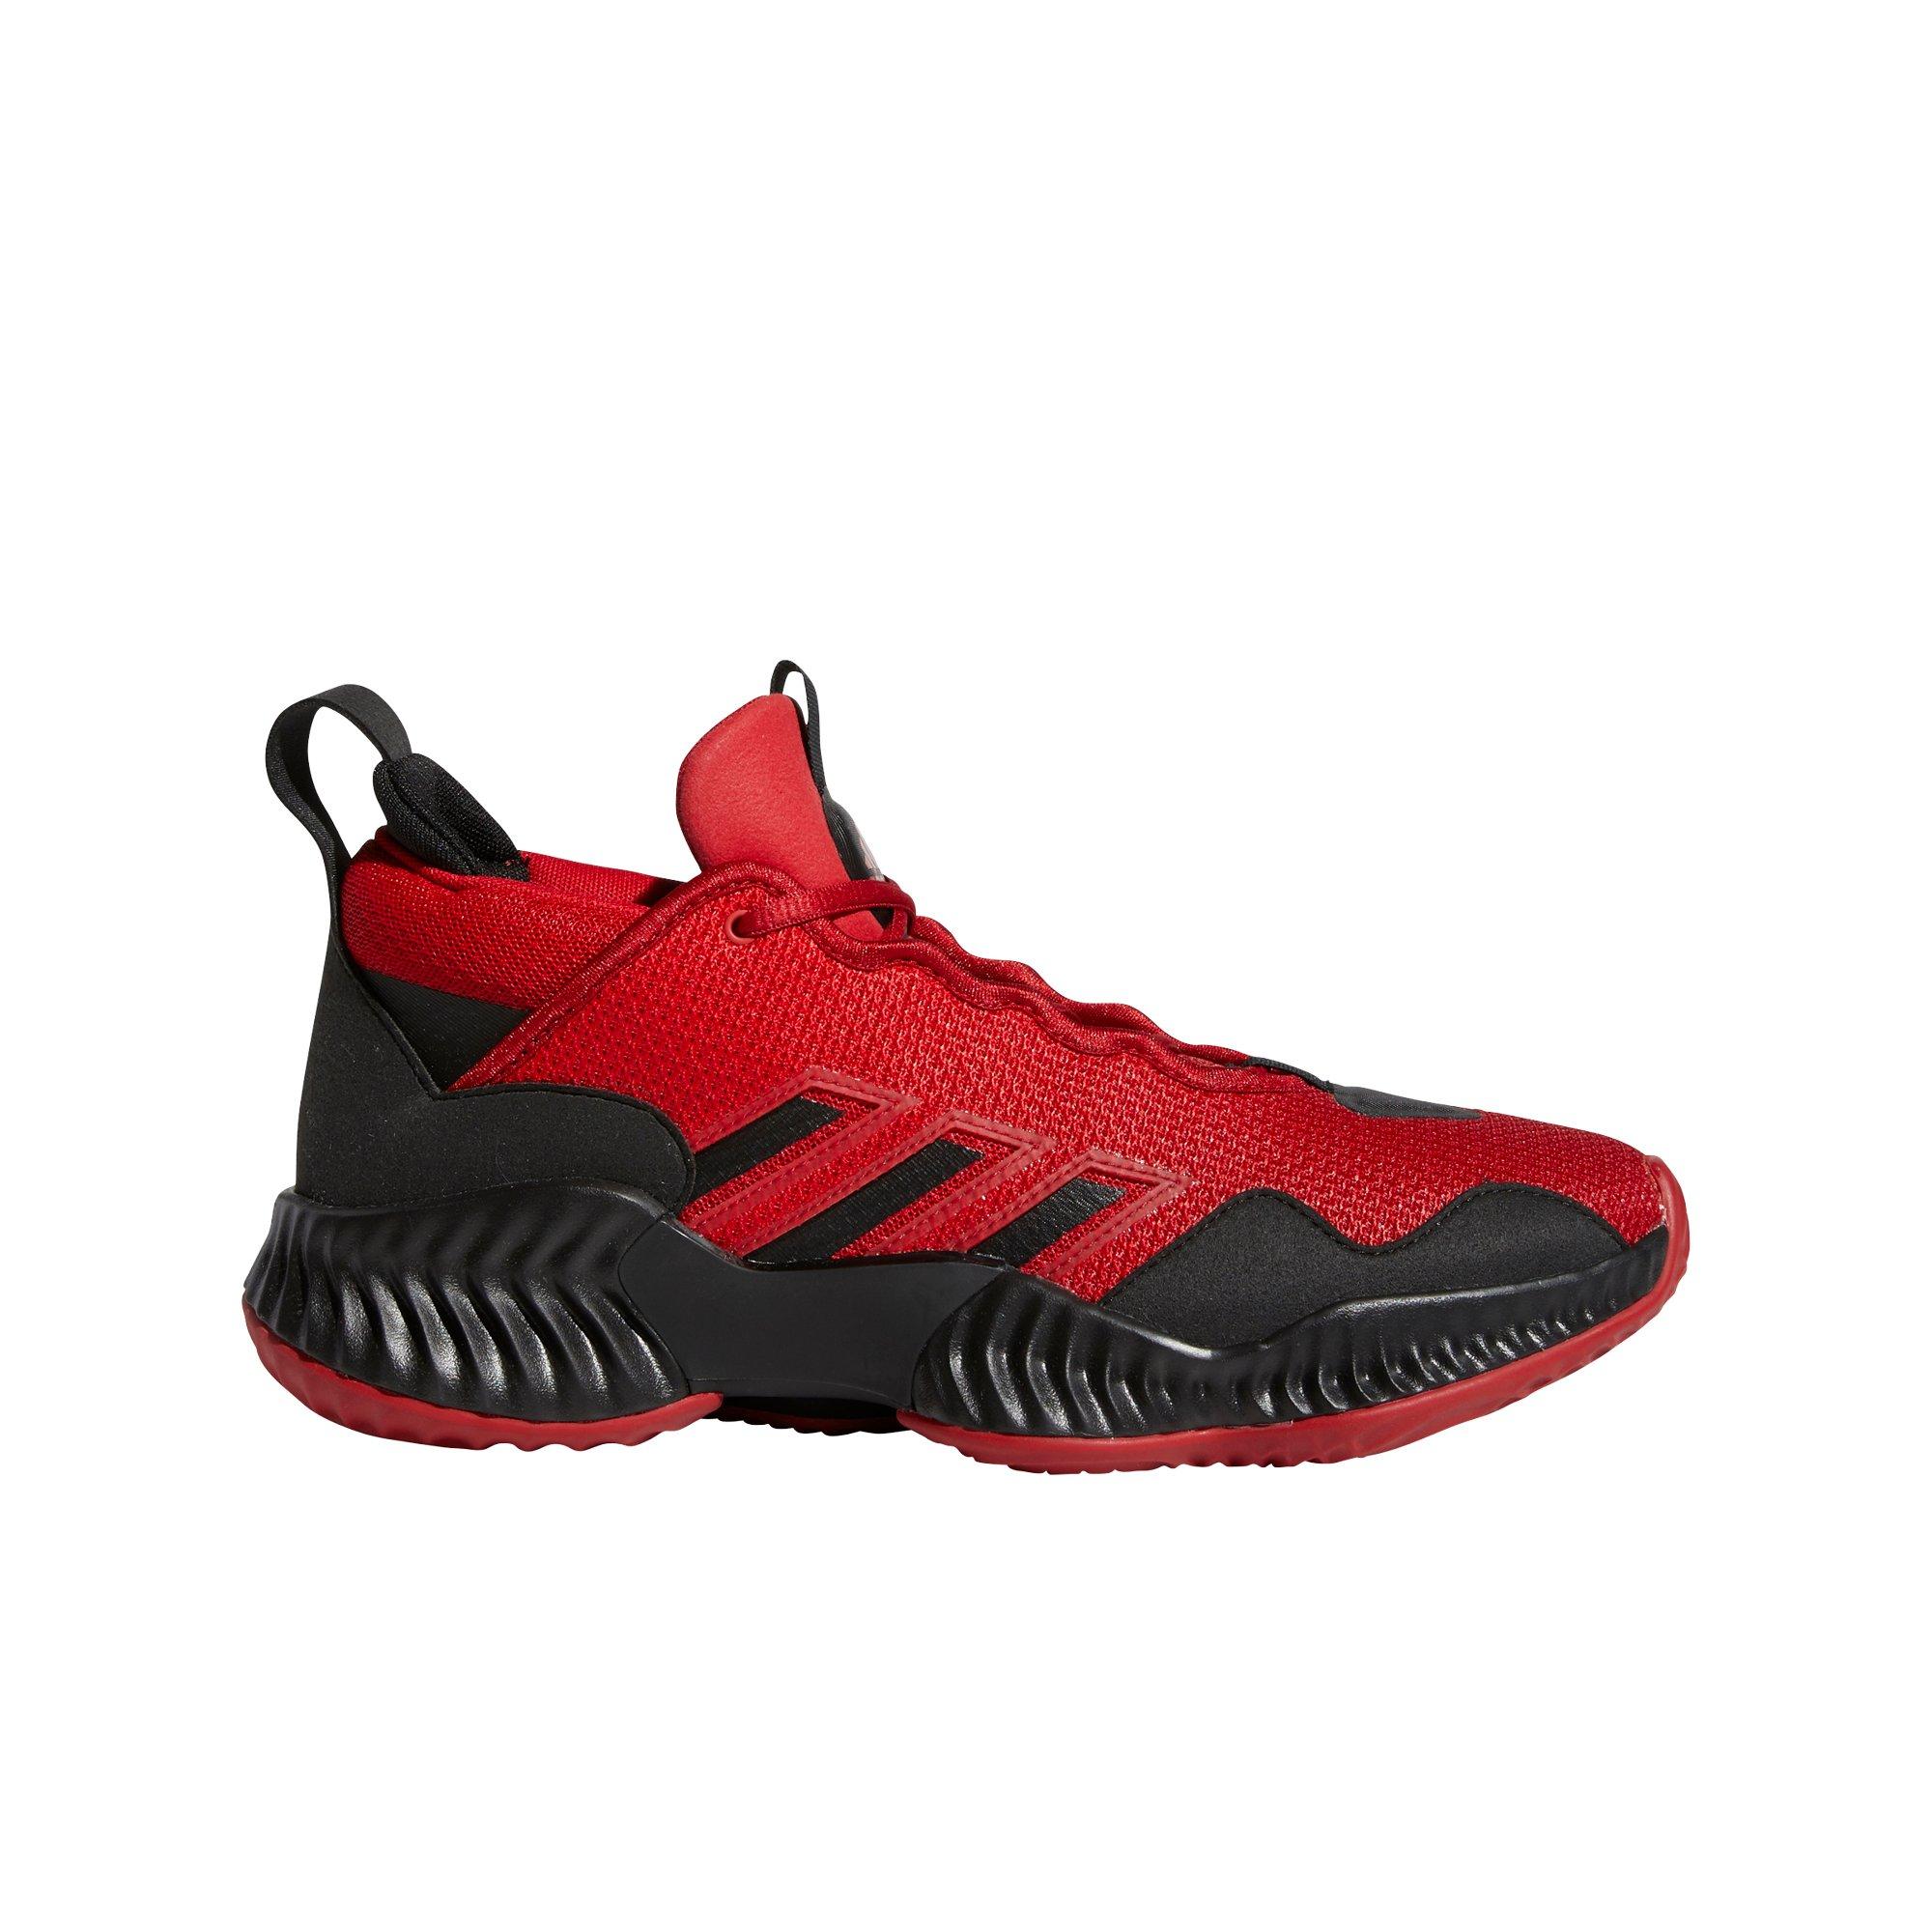 adidas Court Vision "Power Red" Men's Basketball Shoe